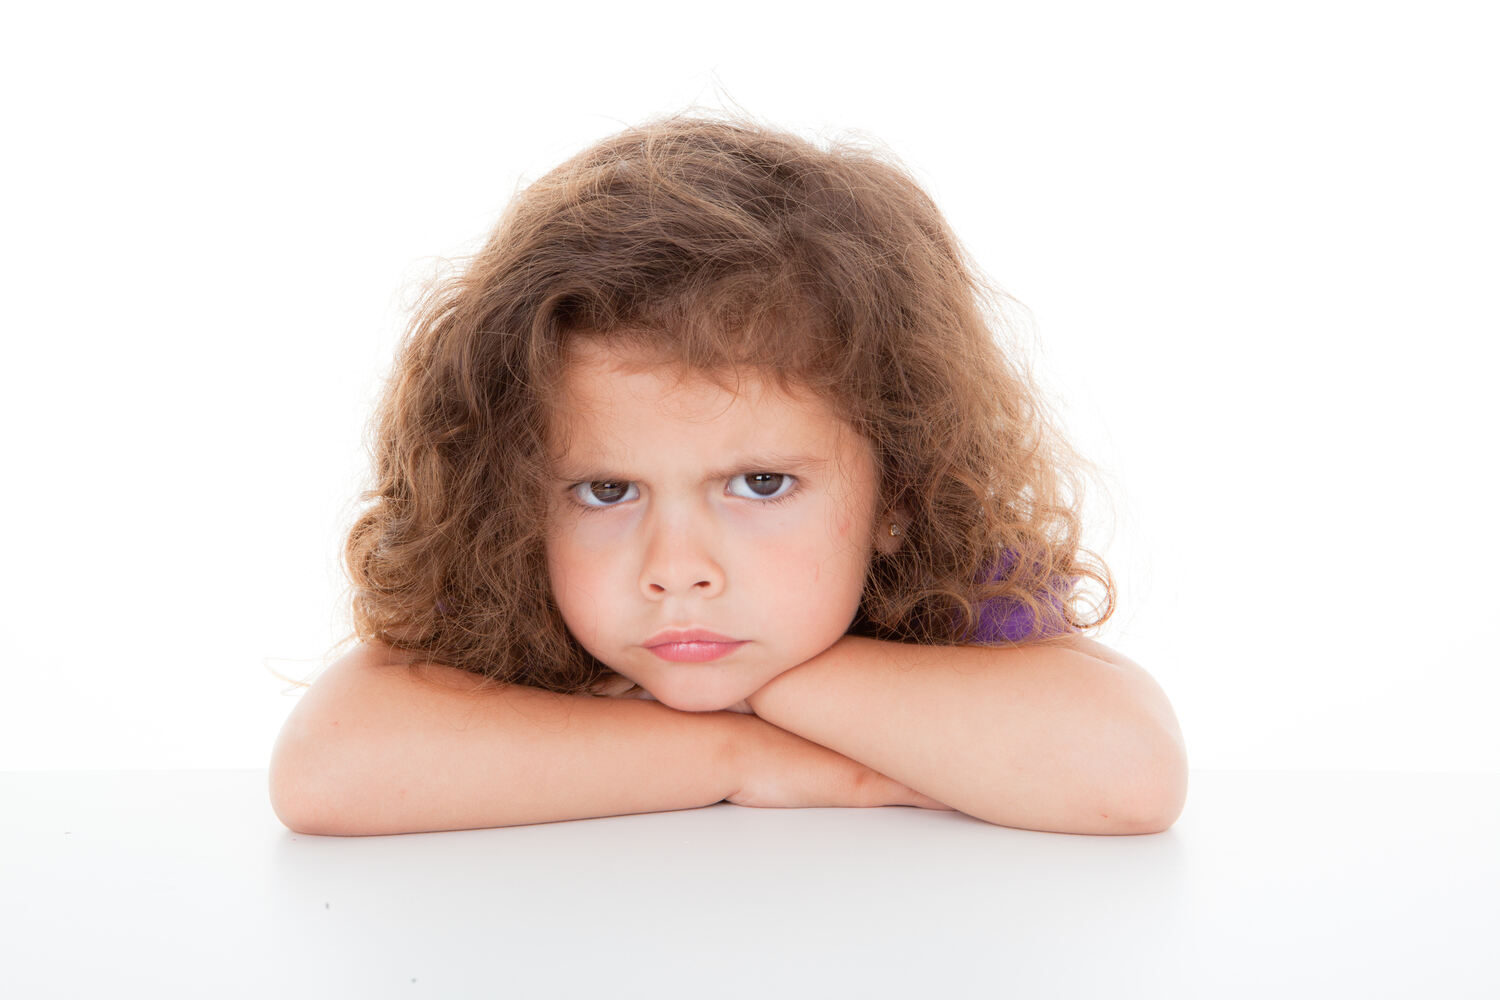 Defiant and rebellious behavior in toddlers